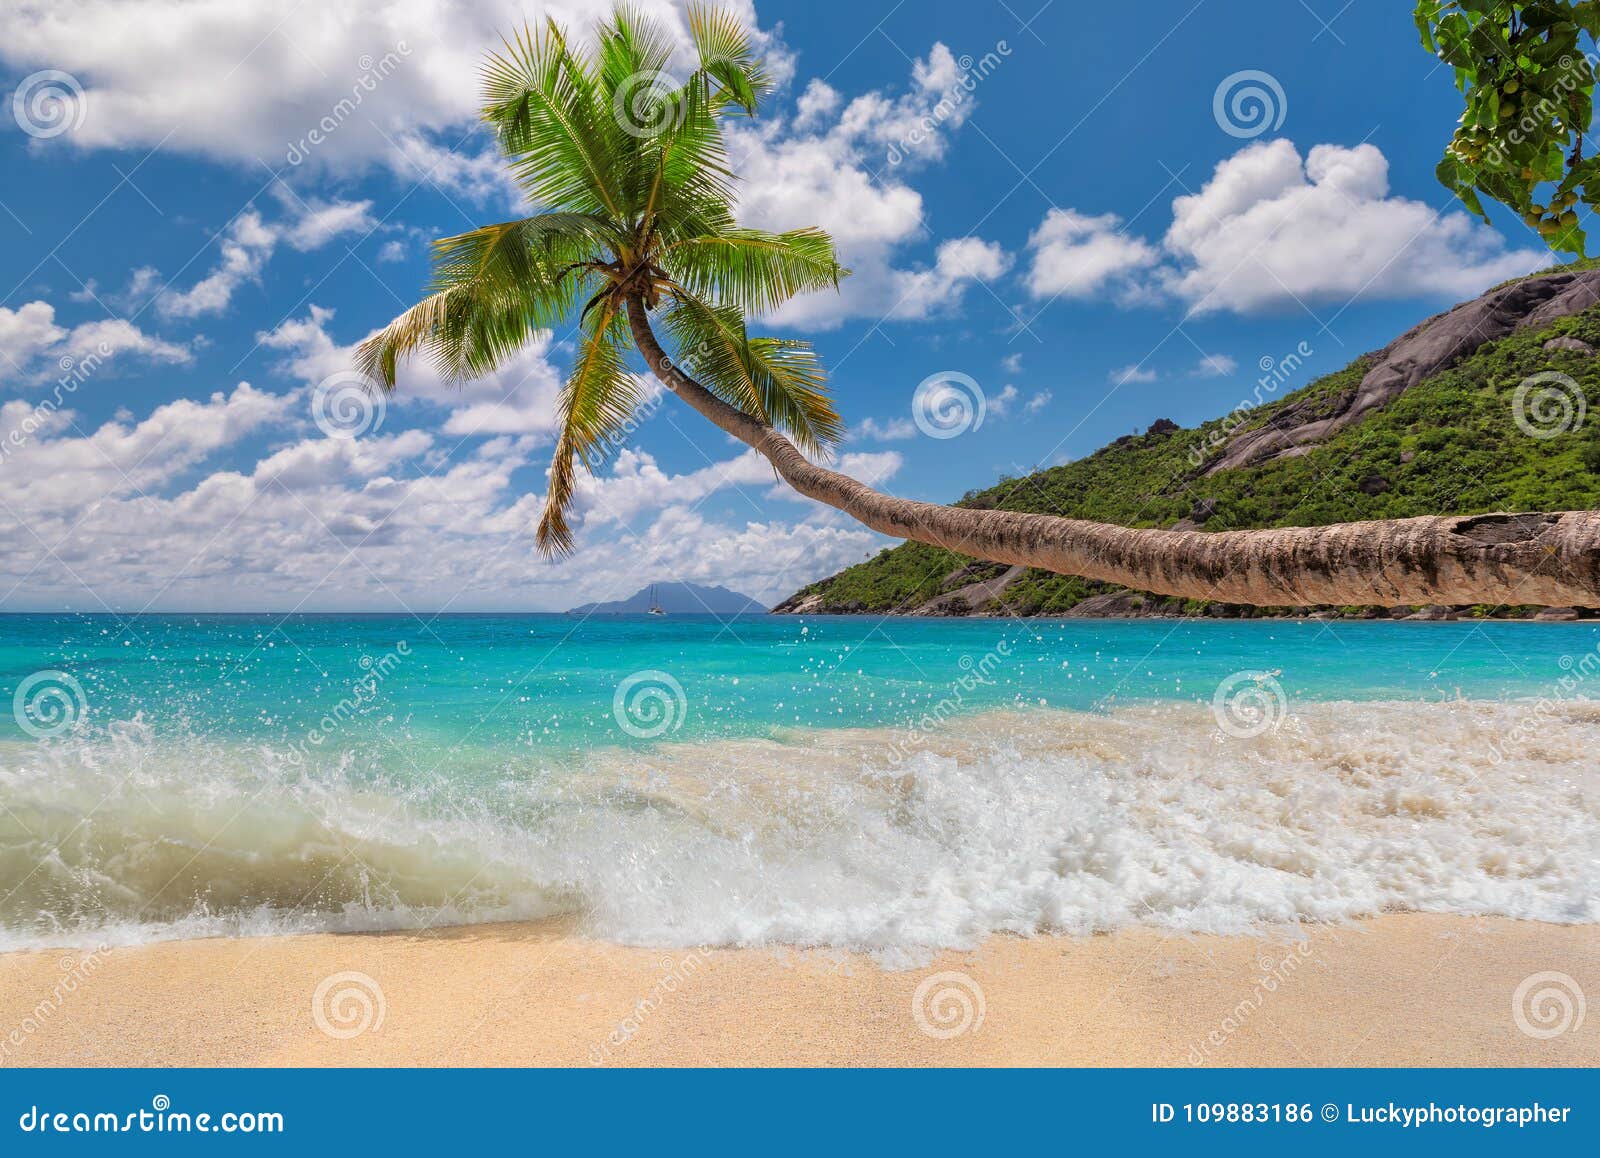 Coconut Palm Over Beach Stretch into the Sea. Stock Photo - Image of ...